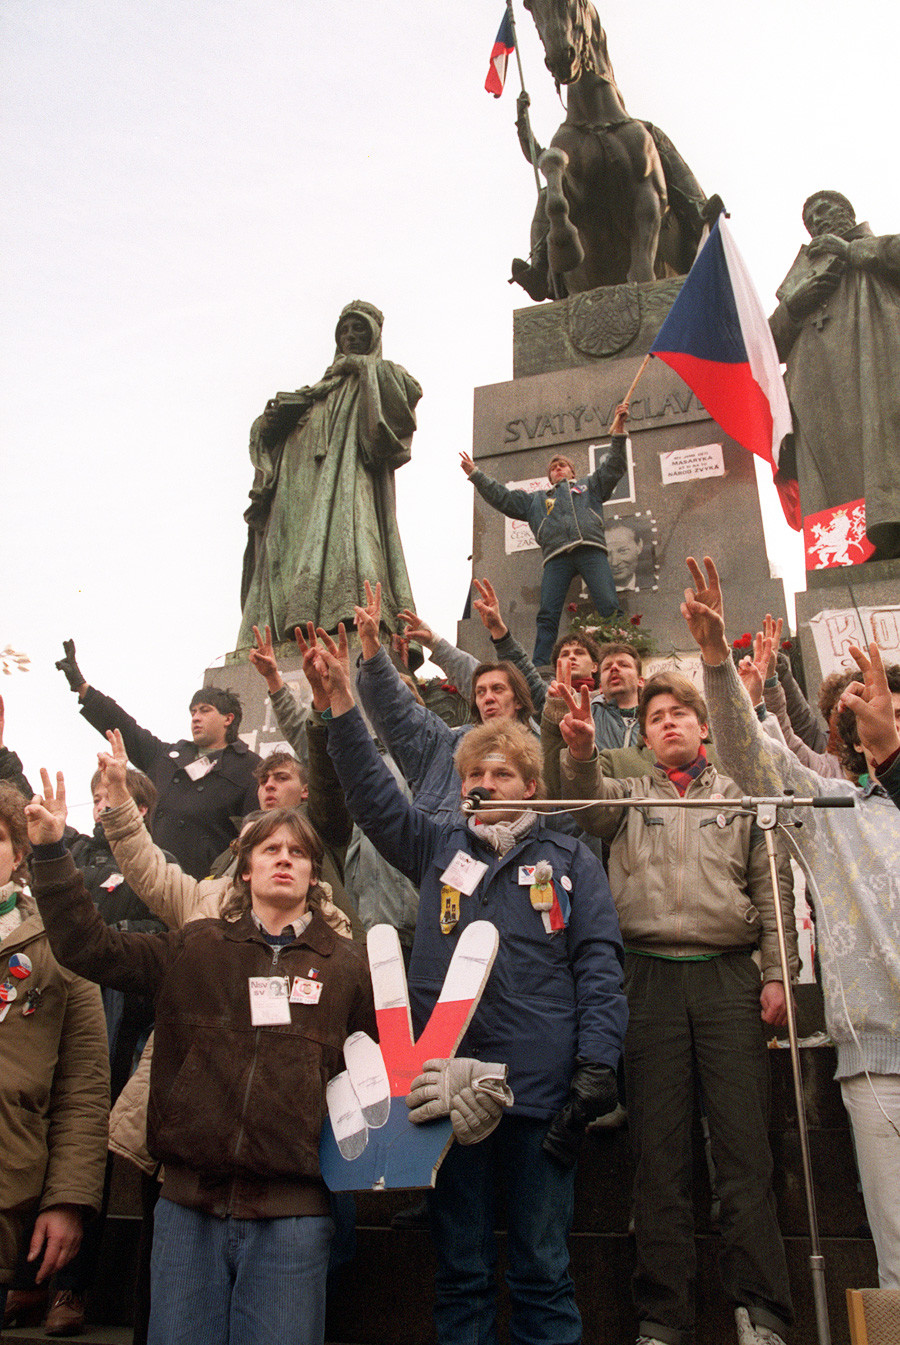 Fall of the Communist government in Czechoslovakia, celebrated by the locals.